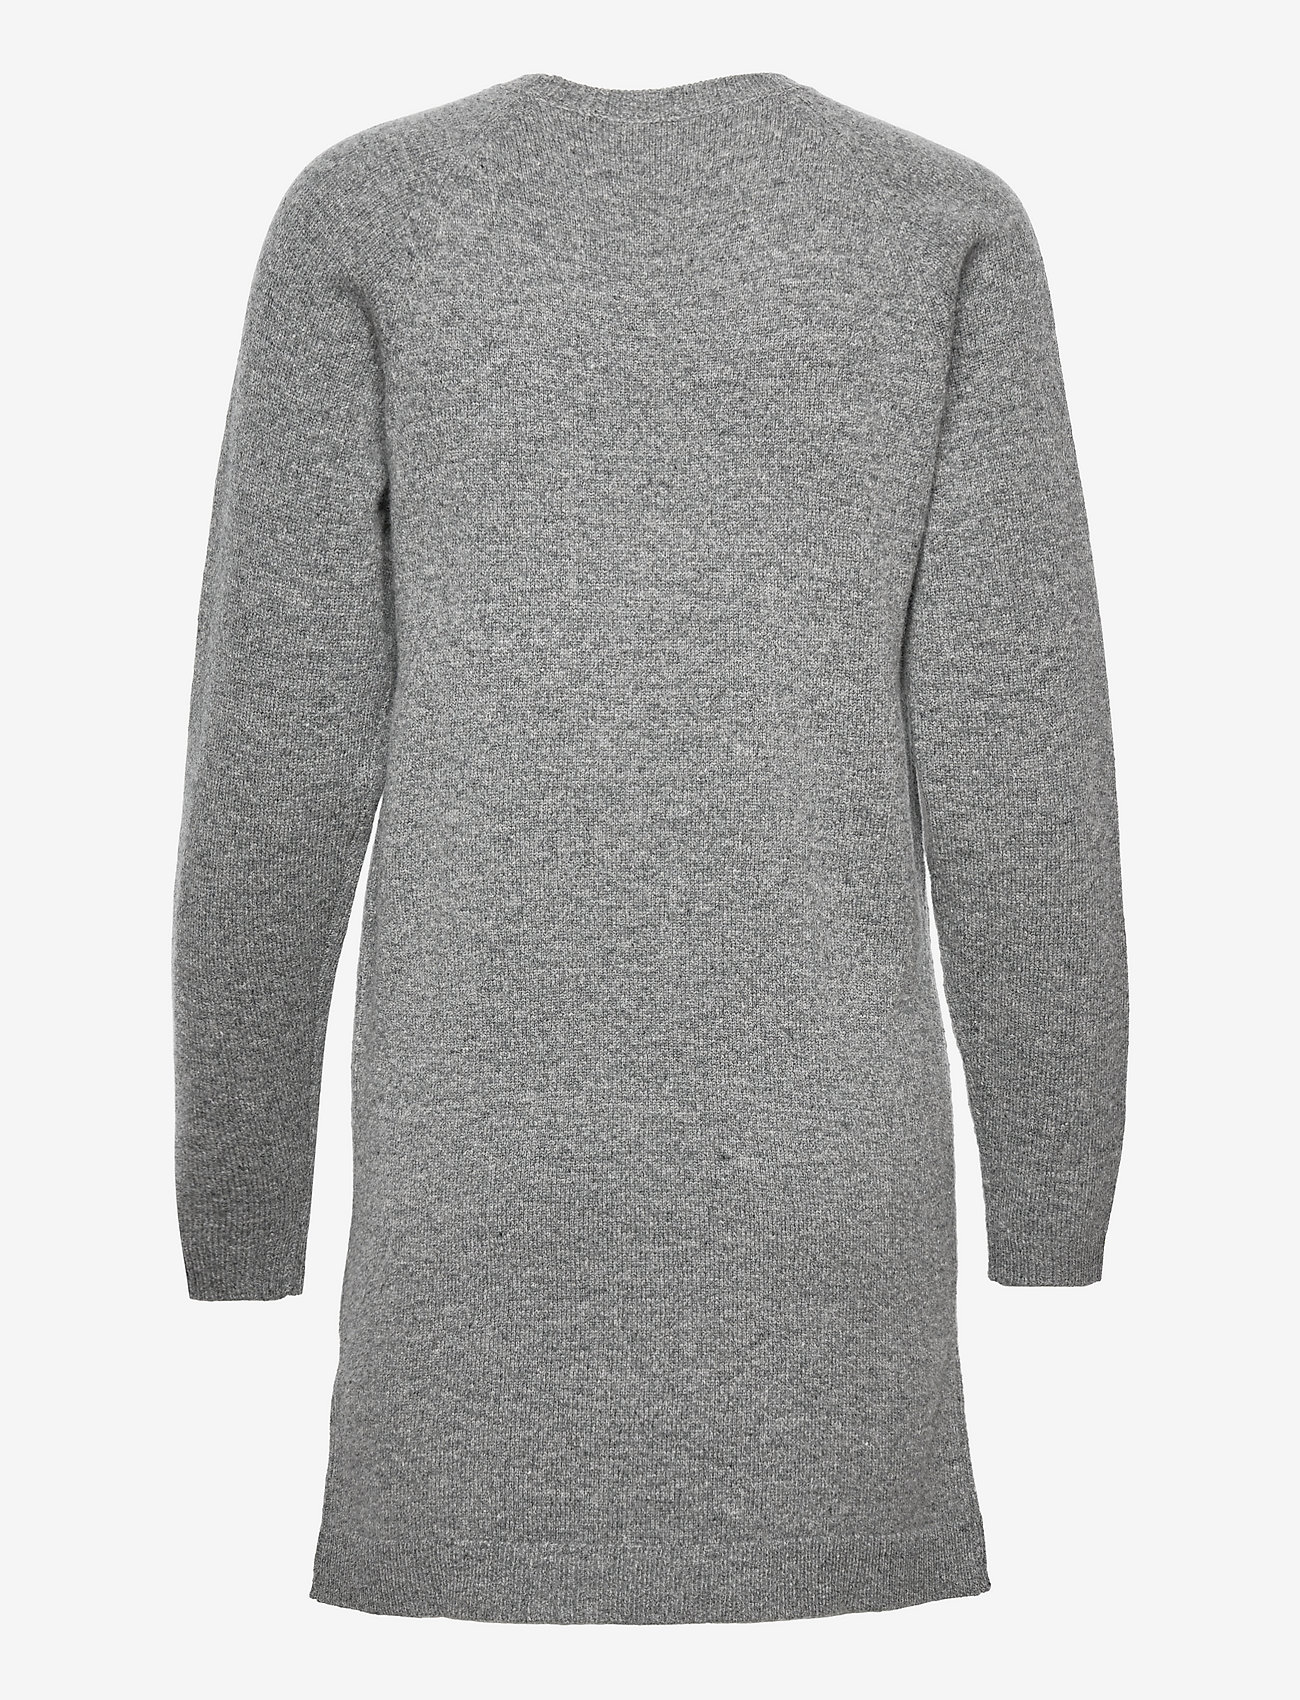 Double A by Wood Wood - Anne lambswool dress - knitted dresses - grey melange - 1